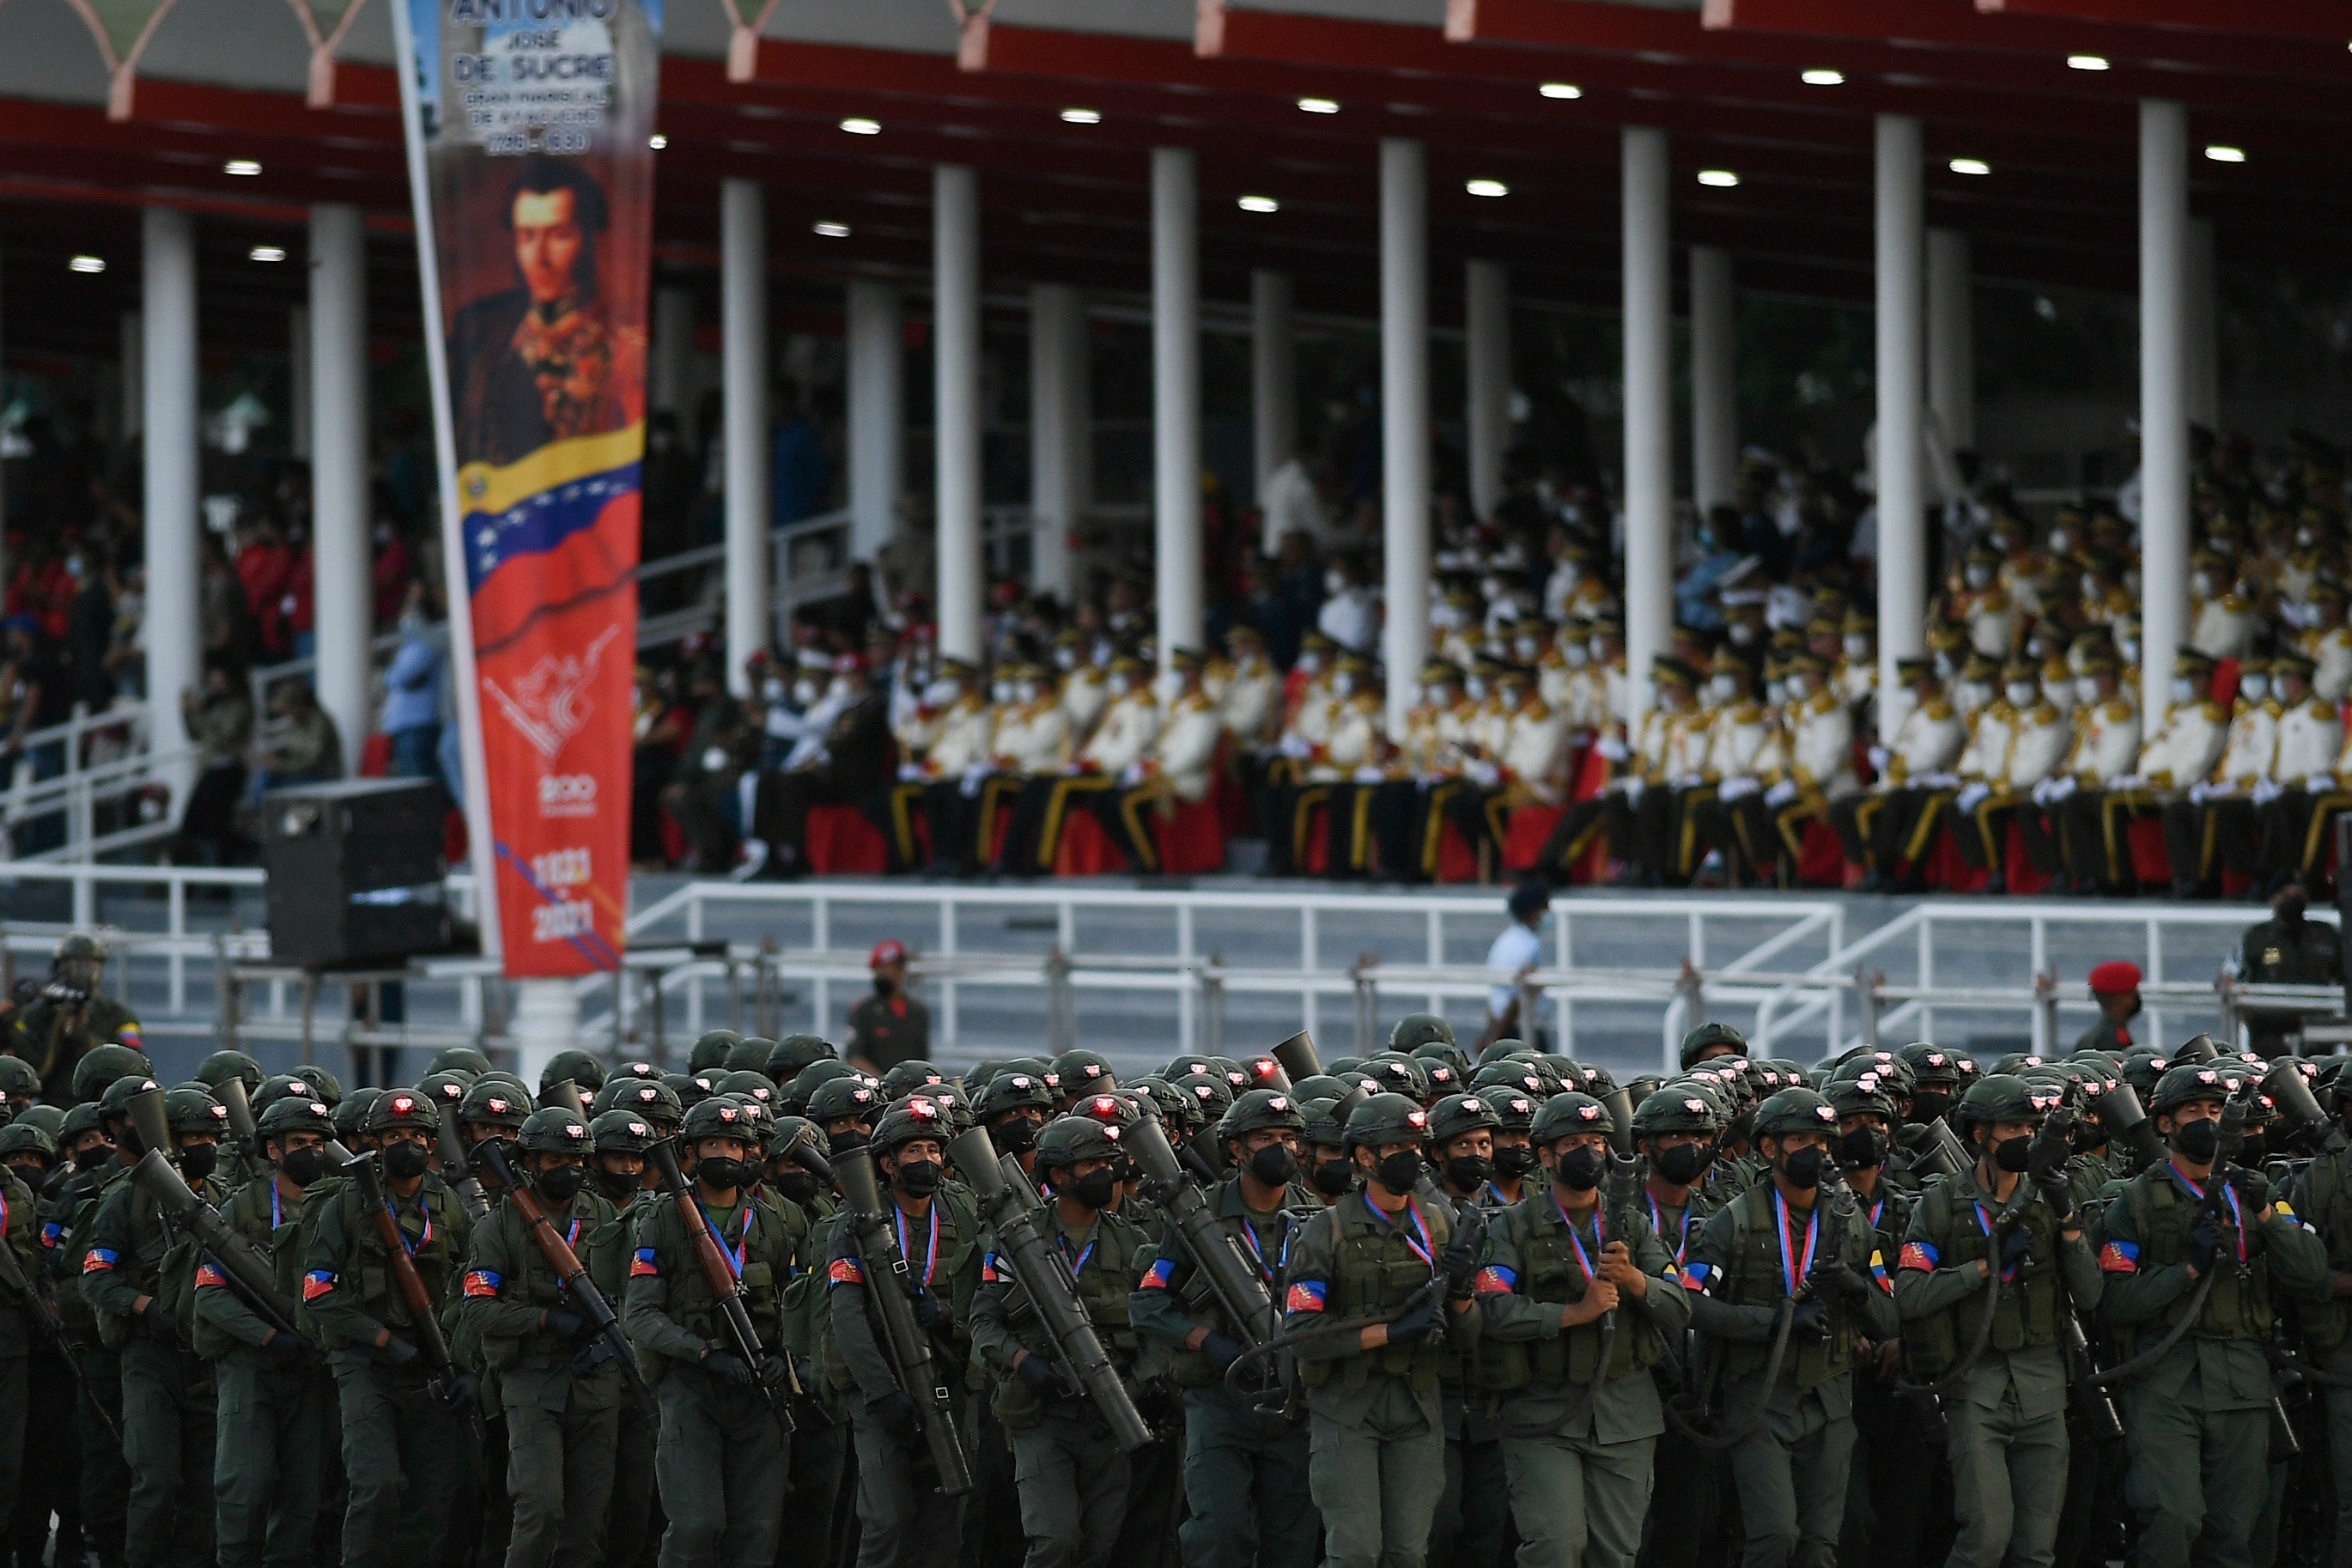 Soldiers march during a military parade marking Independence Day in Caracas, Venezuela, Monday, July 5, 2021. (AP Photo/Matias Delacroix)